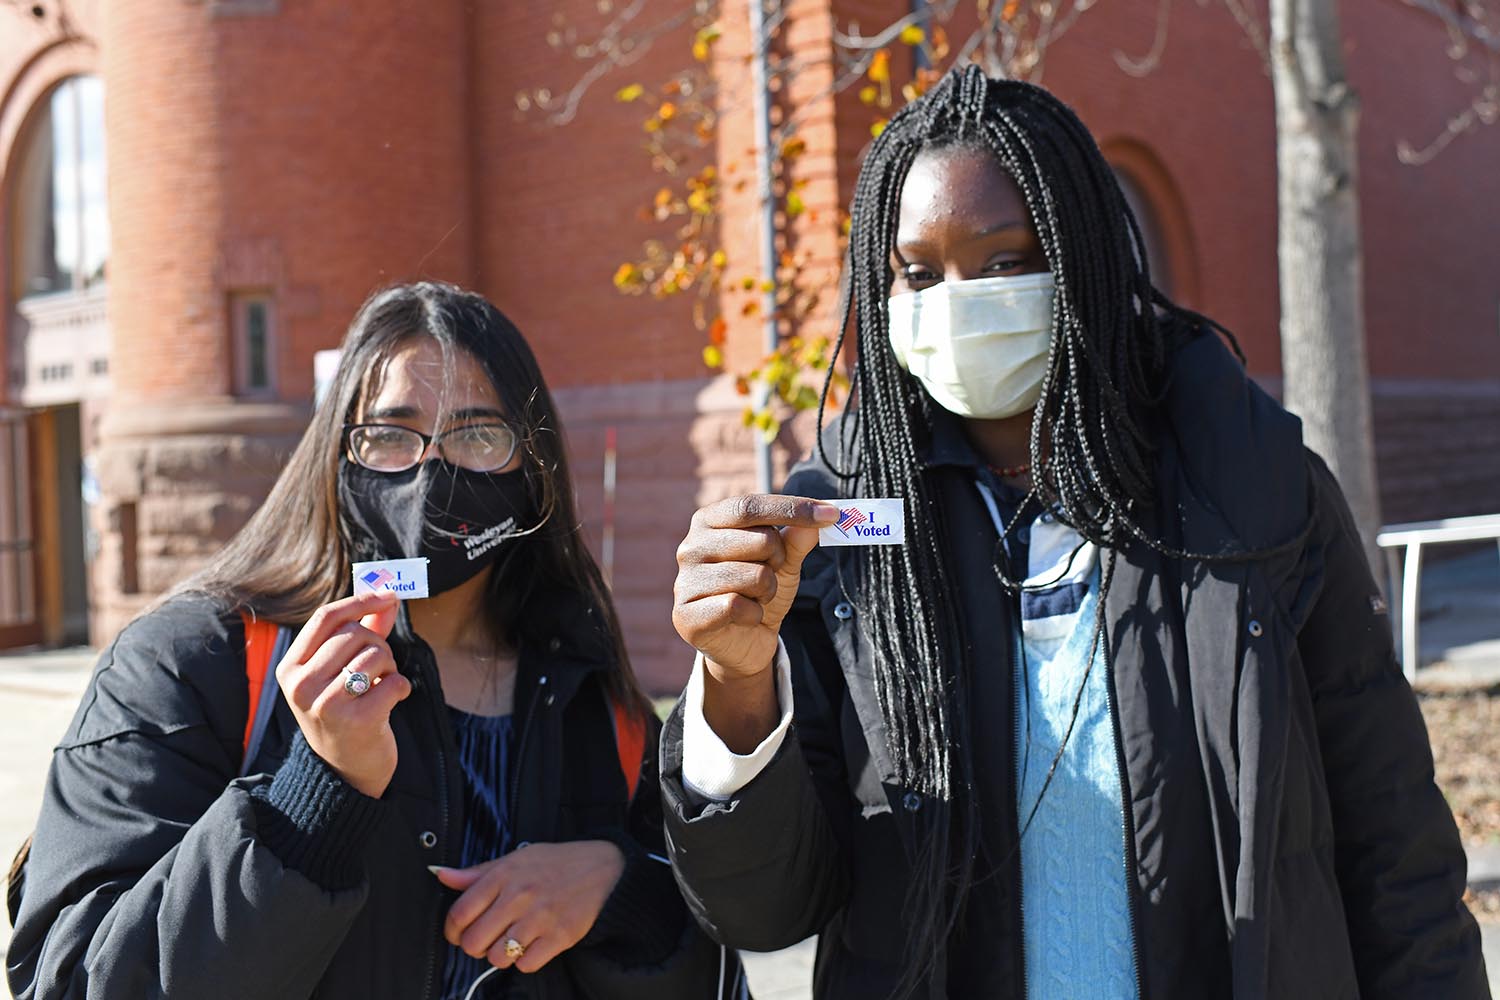 Students showed off their “I Voted” stickers after casting their ballots on Nov. 3. Wesleyan students, faculty, and staff, as well as Middletown residents in Voting District 14, turned out to vote at the polling place in Beckham Hall.